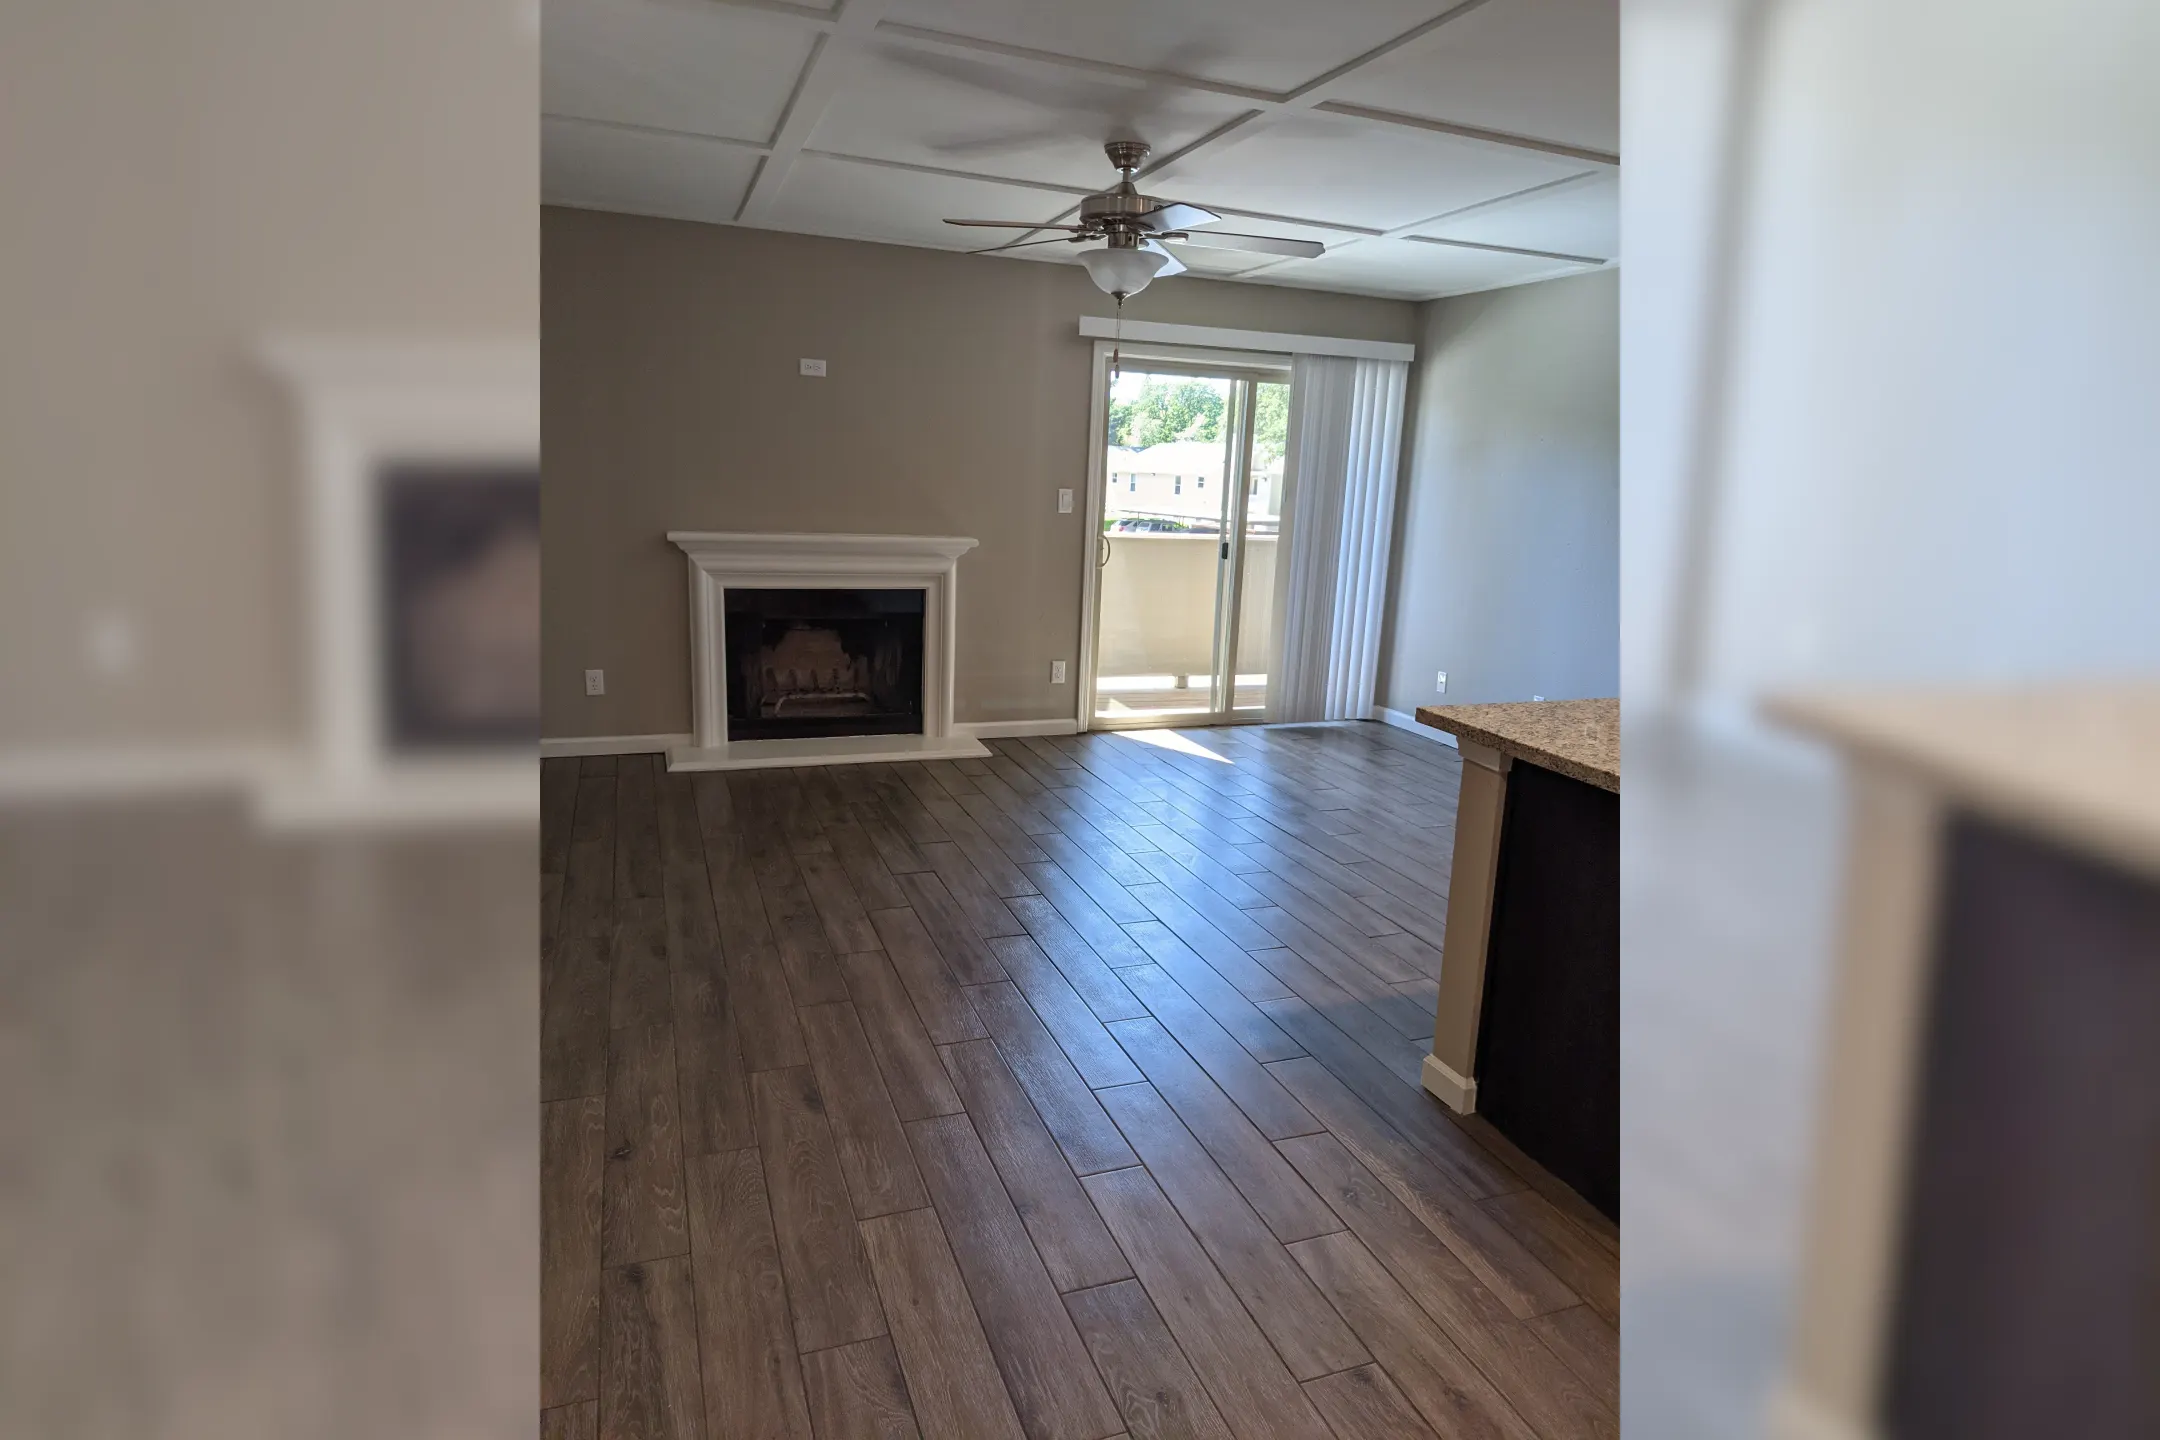 Living Room - Creekside Colony - Citrus Heights, CA